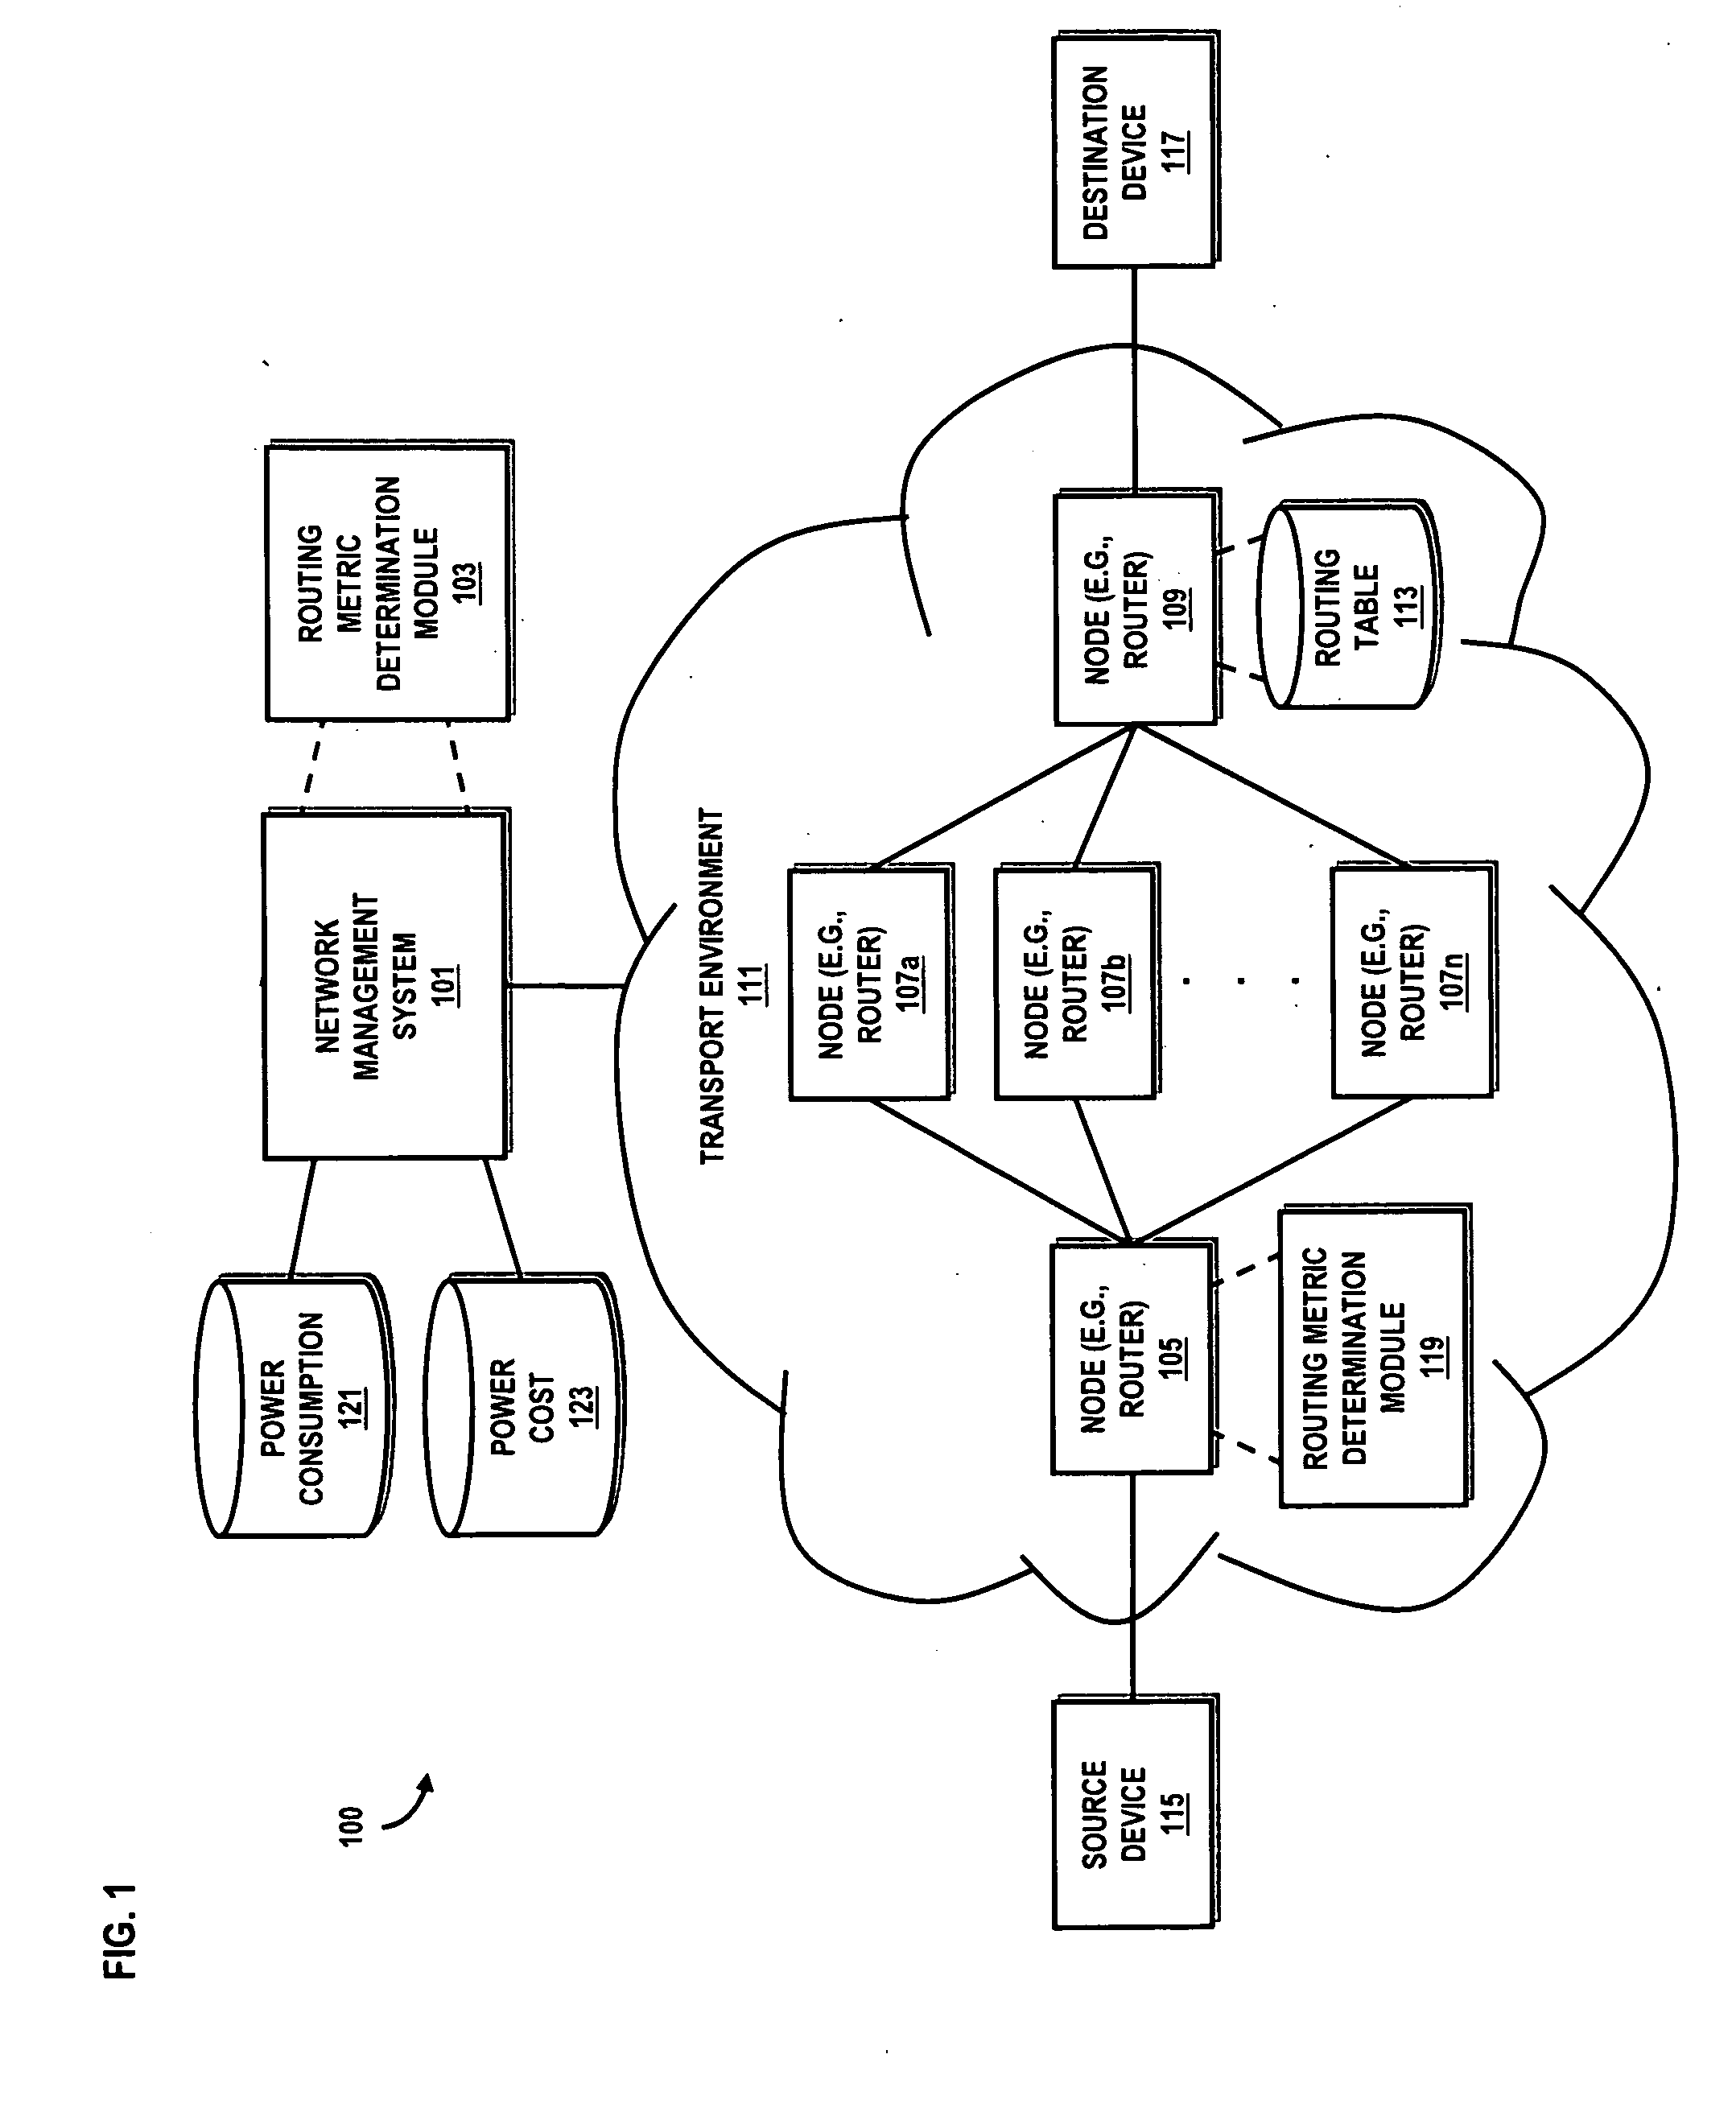 System and method for dynamically adjusting routing metrics based on power consumption